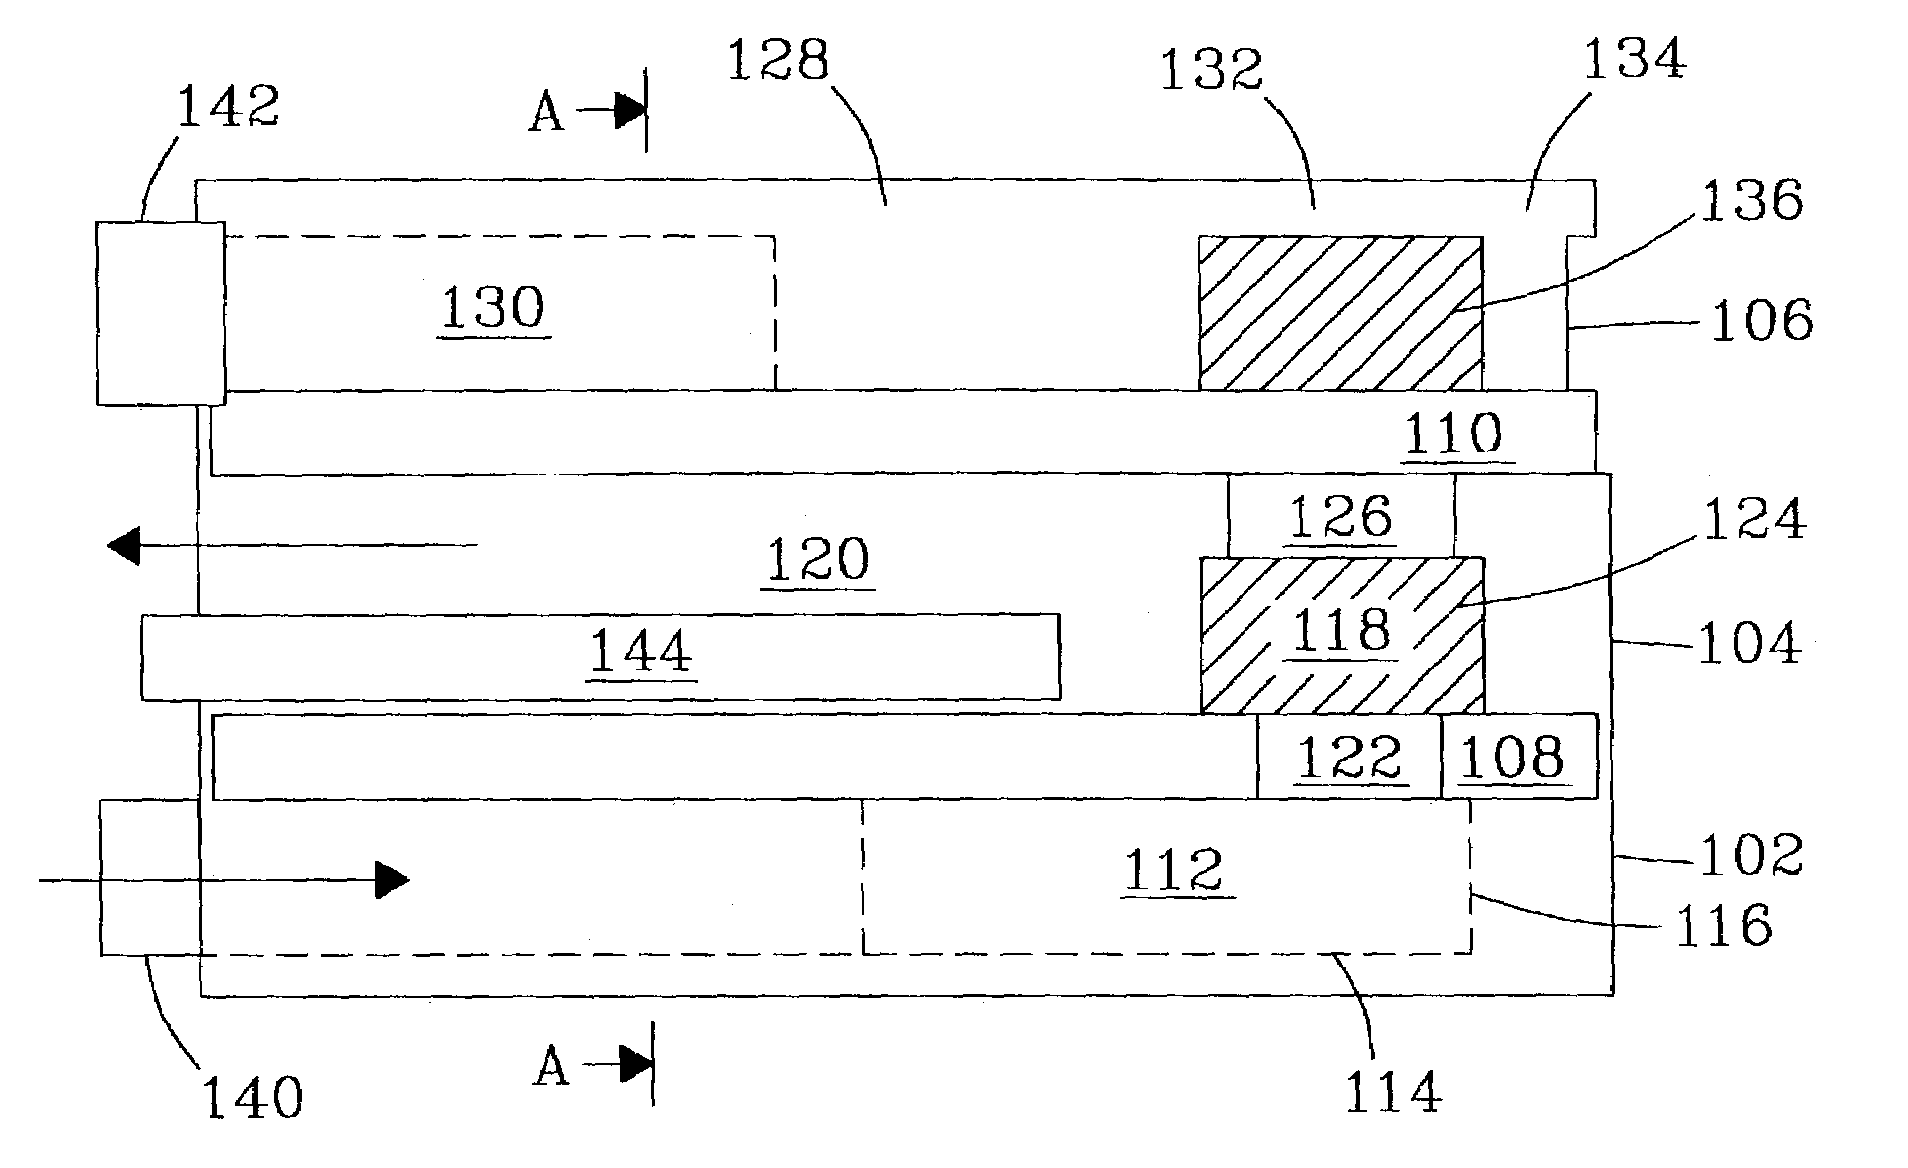 Microcombustors, microreformers, and methods involving combusting or reforming fluids